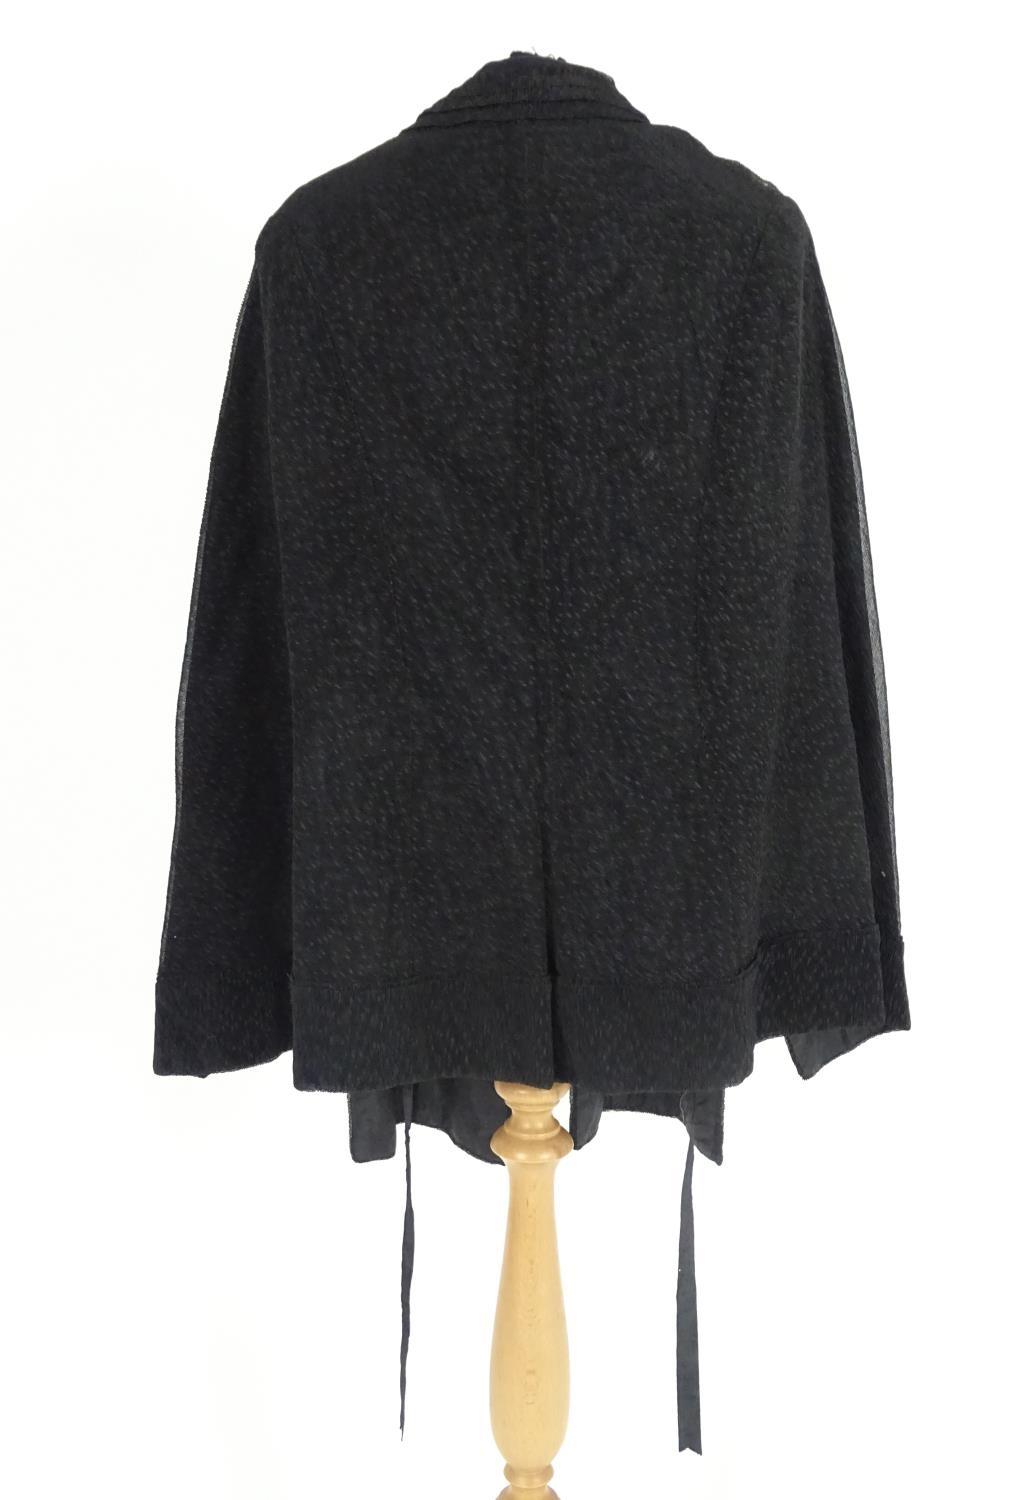 A bespoke vintage black crepe cape, Ladies size small approx. Please Note - we do not make reference - Image 2 of 7